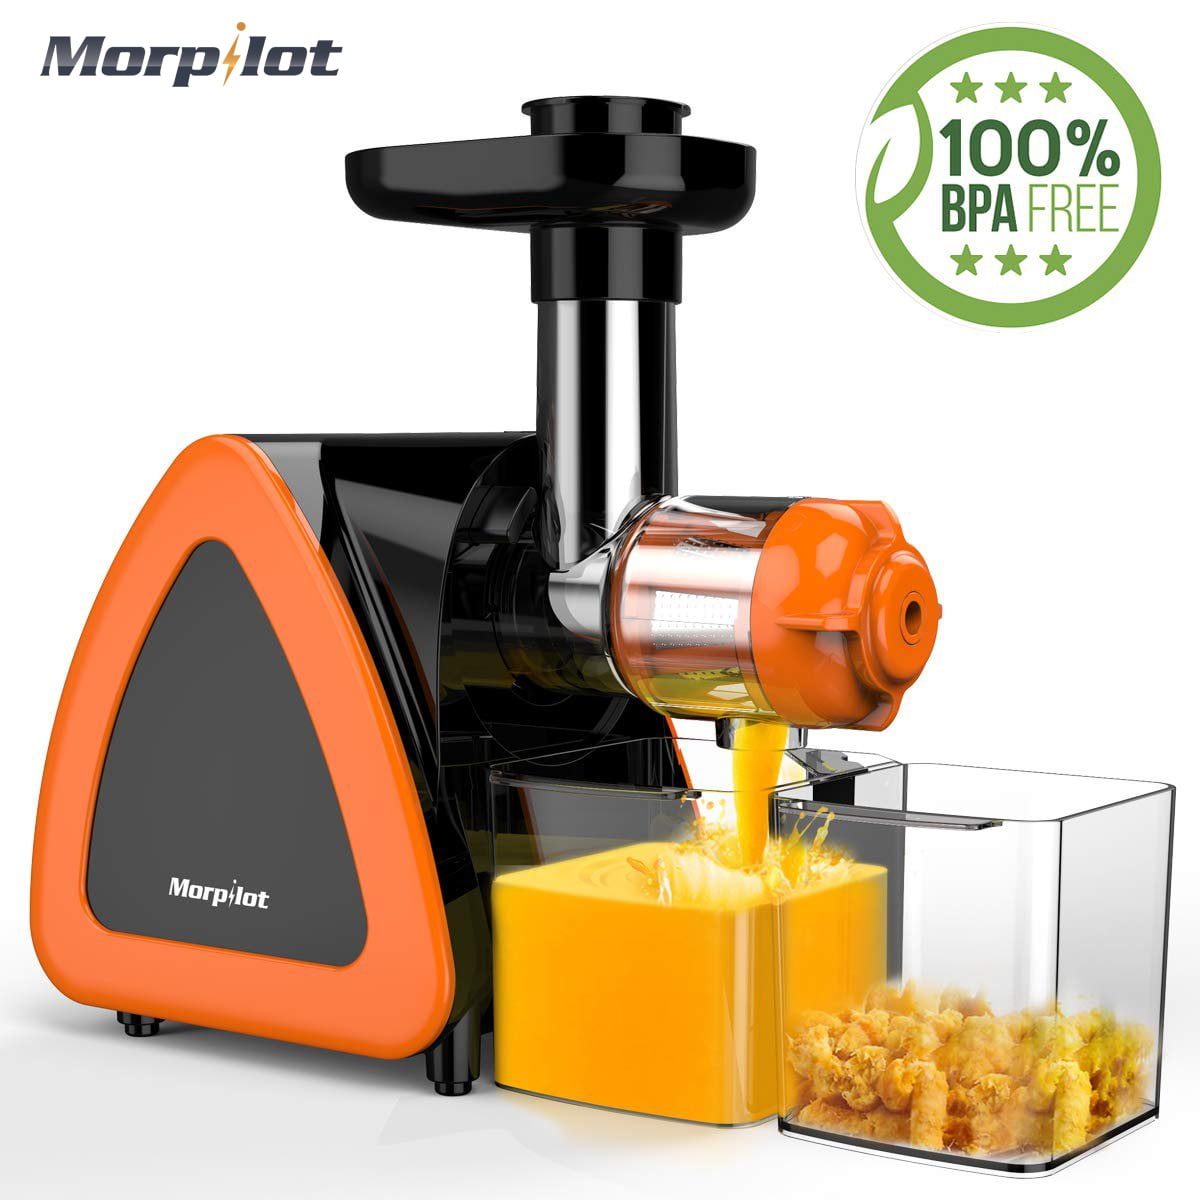 Slow Speed Masticating Juicer Extractor for Fruits and Vegetables. Morpilot Juicer Machine/Cold Press Juicer Machine with Quiet Motor & Reverse Function Higher Juicer Yield/Easy to Clean/BPA-Free 